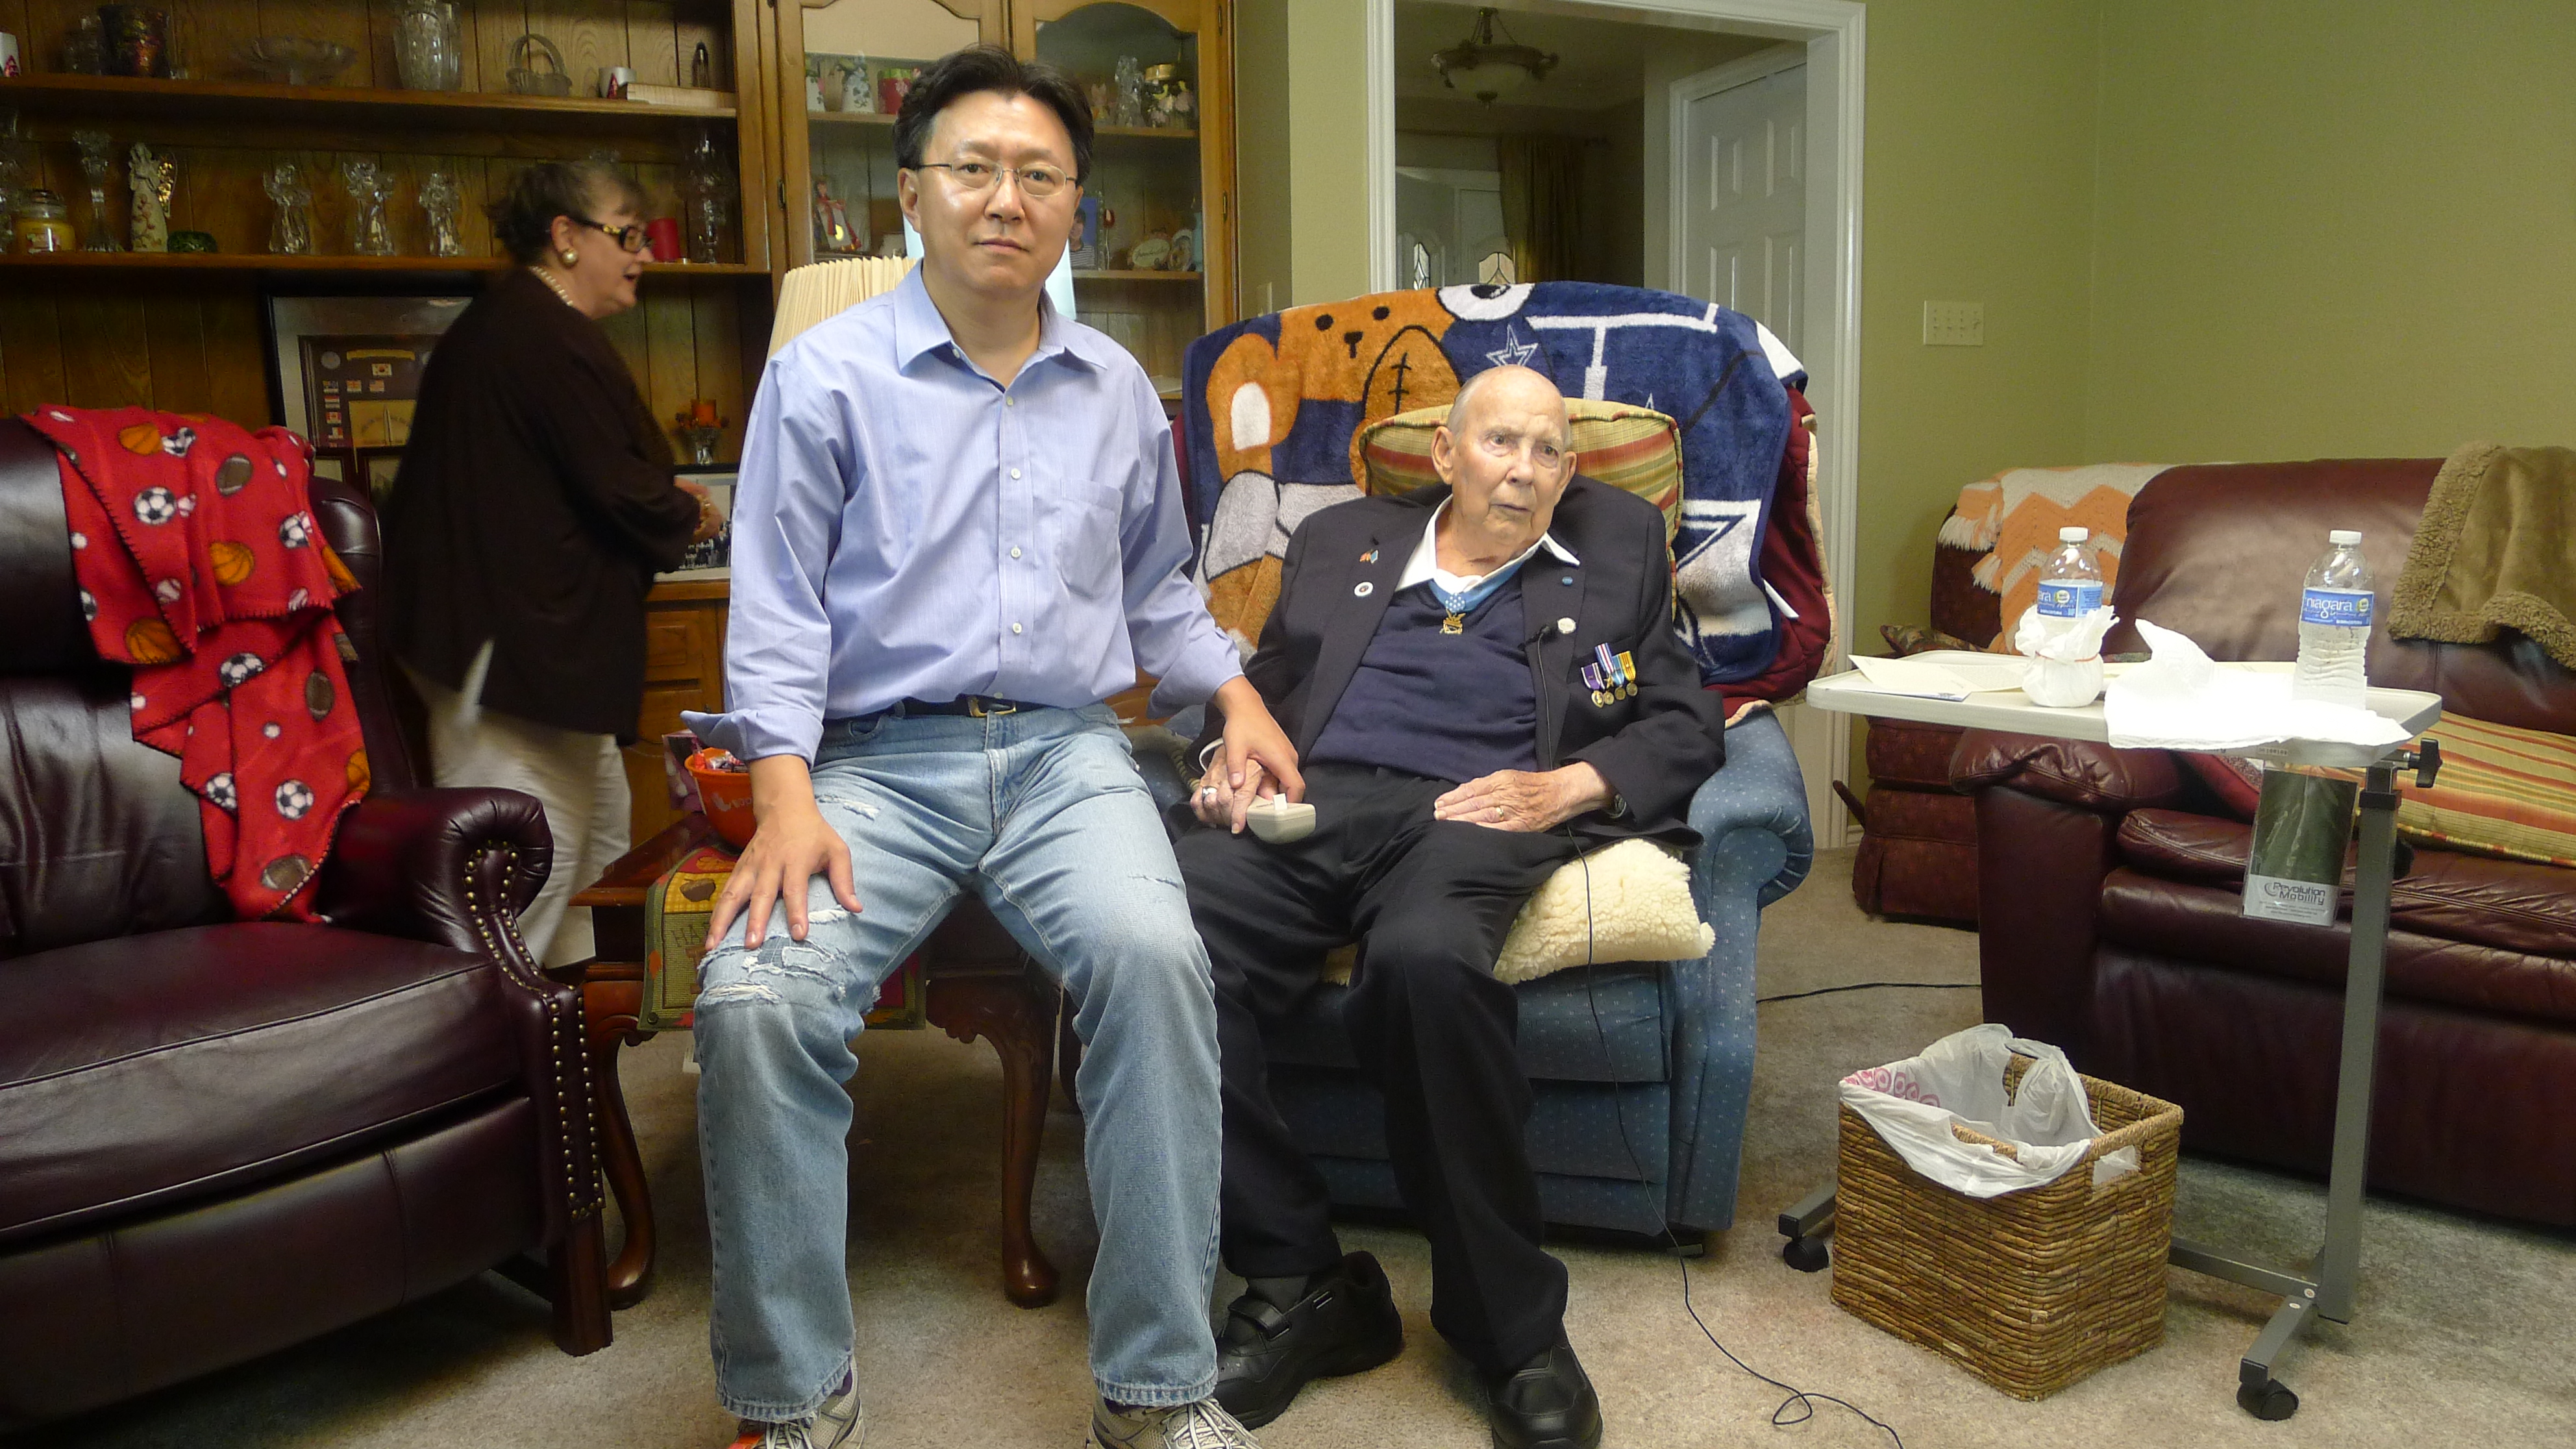 President Han with Col. Stone 